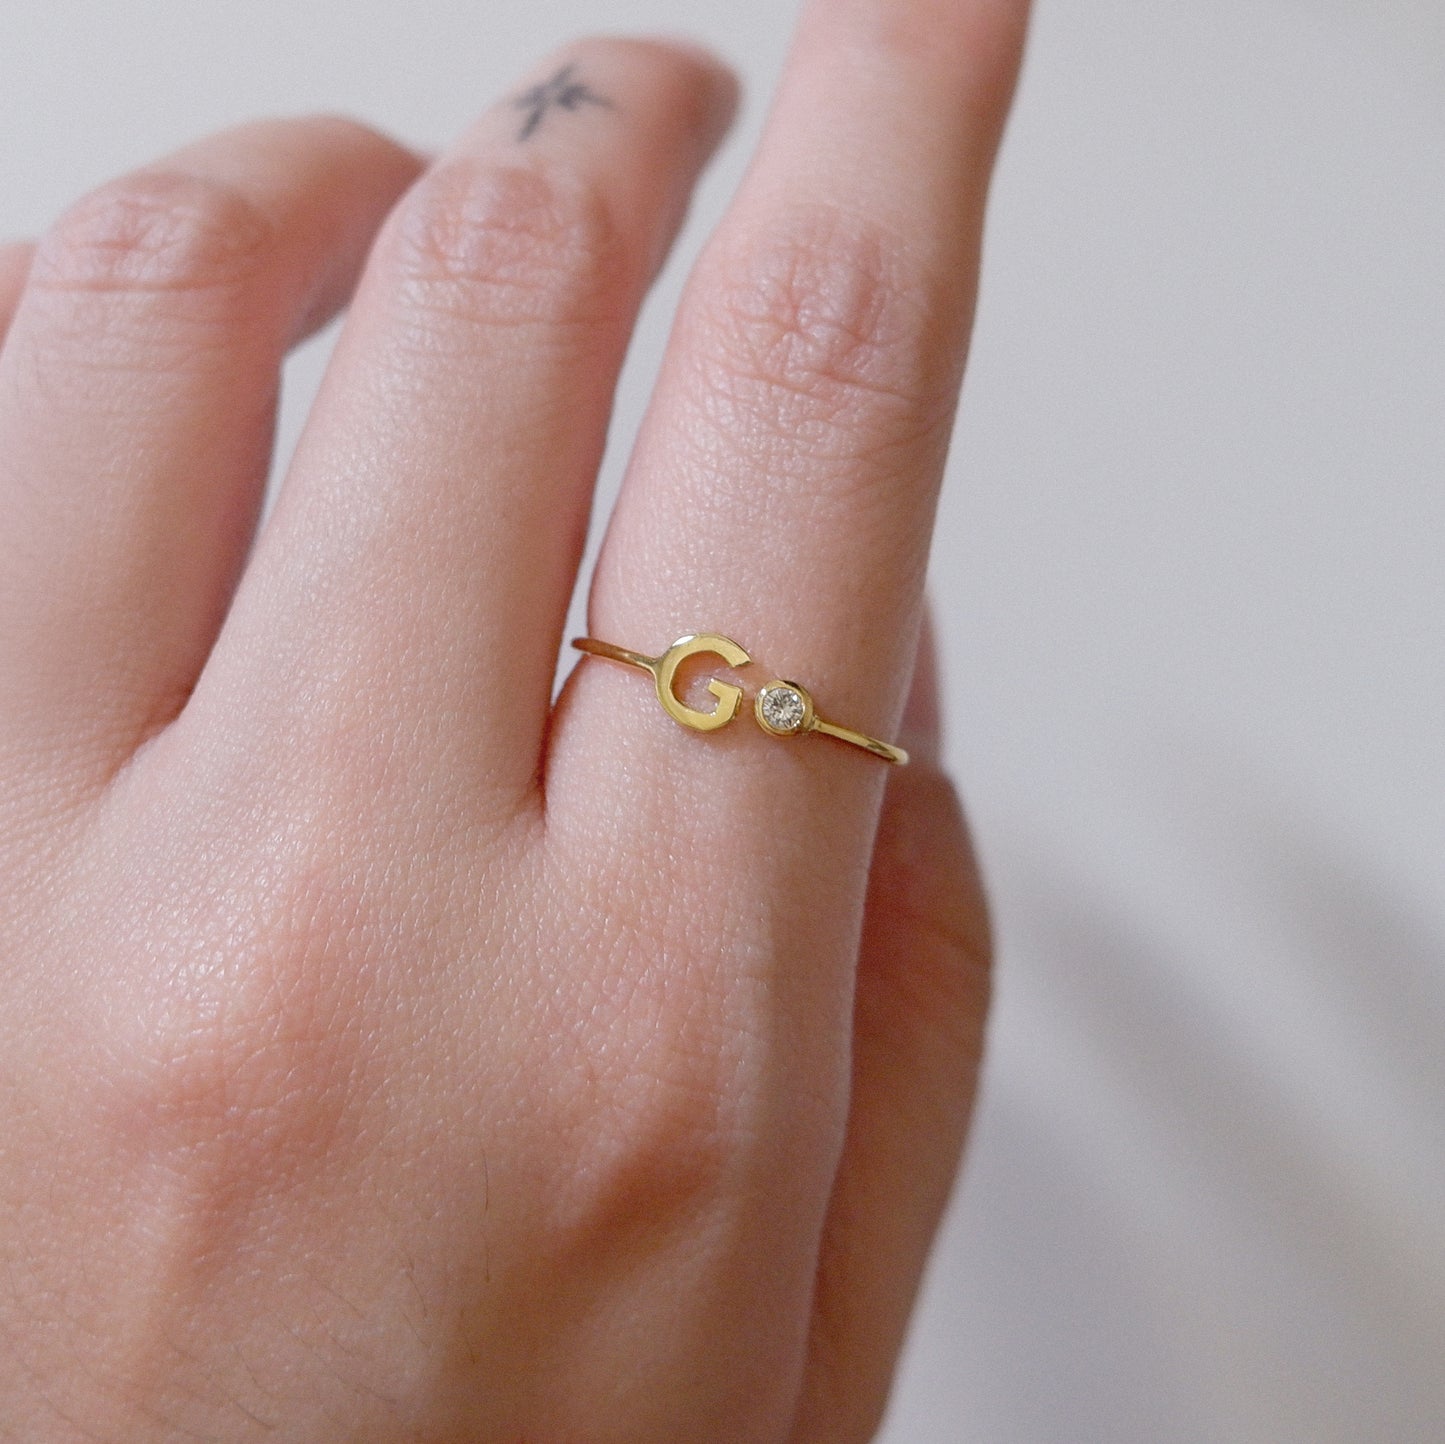 The Diamond Initial Ring in Solid Gold